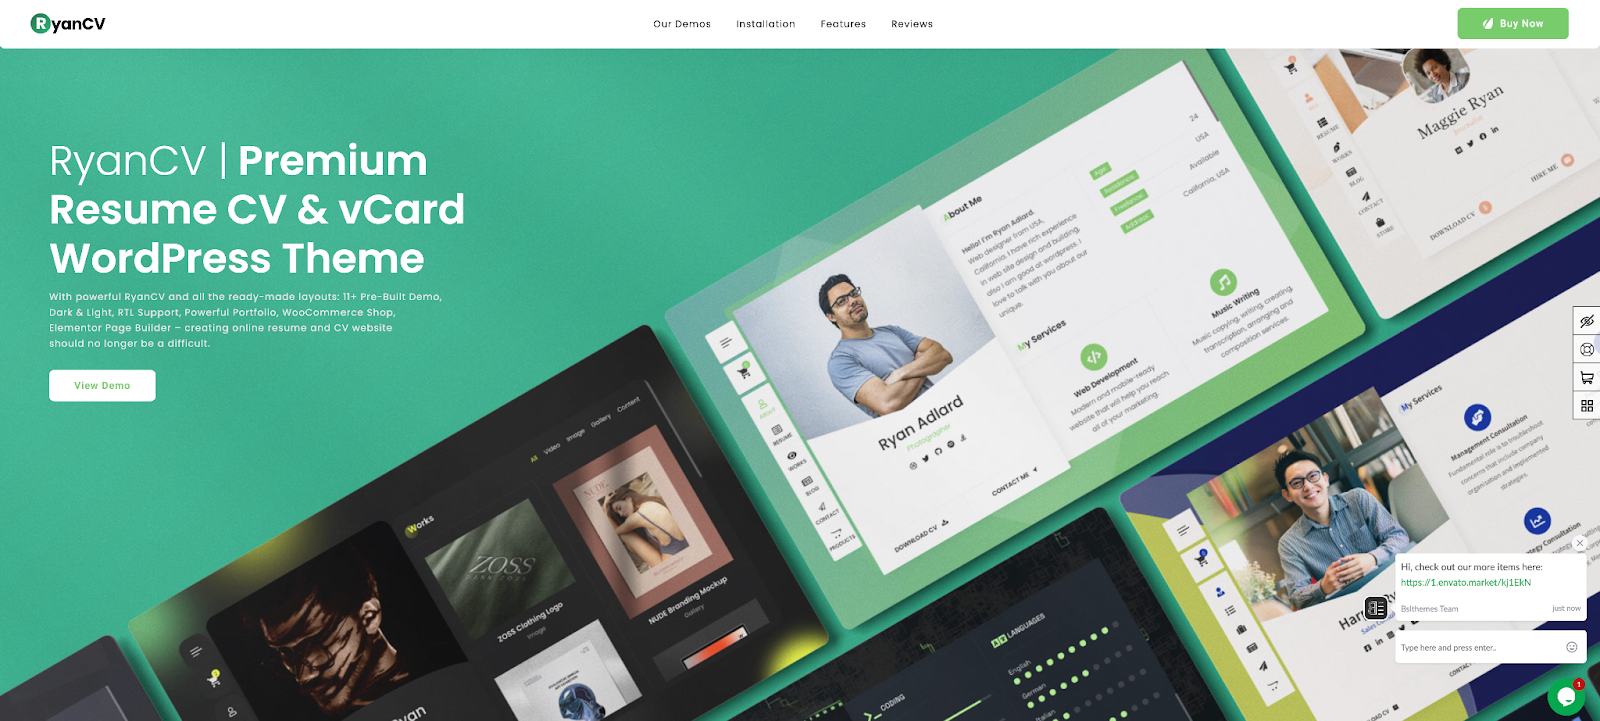 Use the RyanCV template for WordPress to build your blog and professional portfolio website